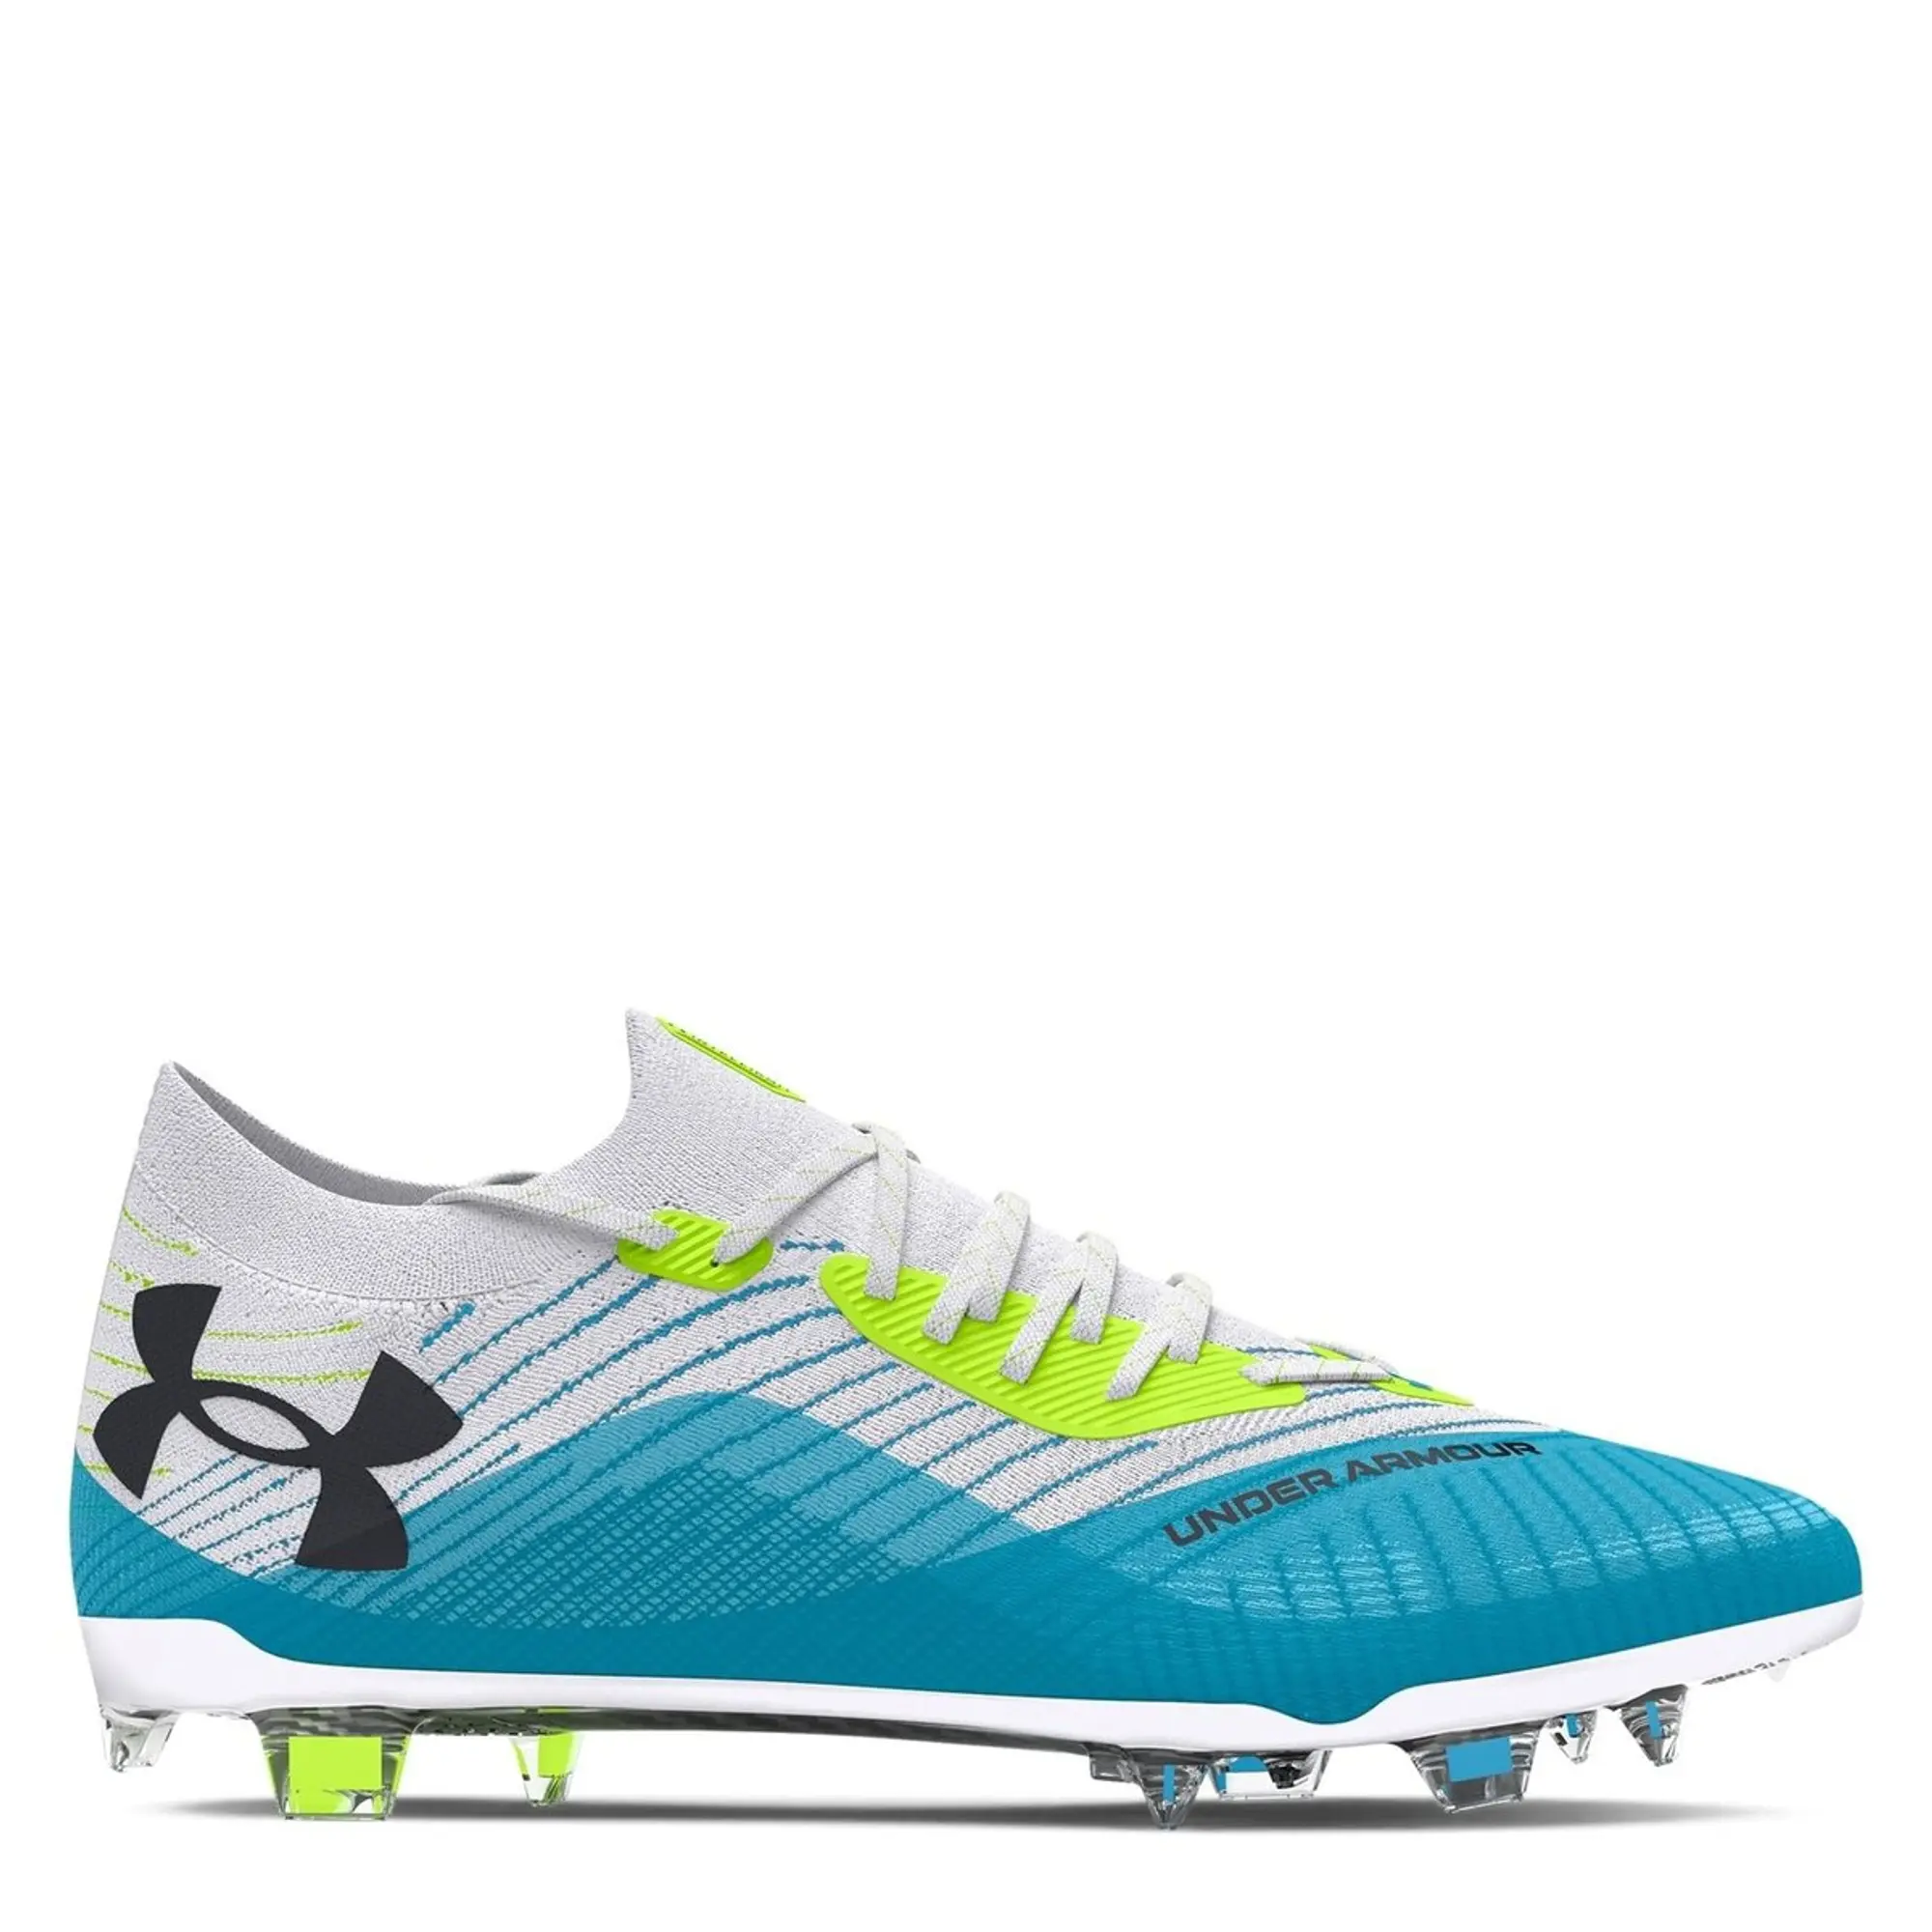 Under Armour Armour Shadow Elite 2 Womens Firm Ground Football Boots